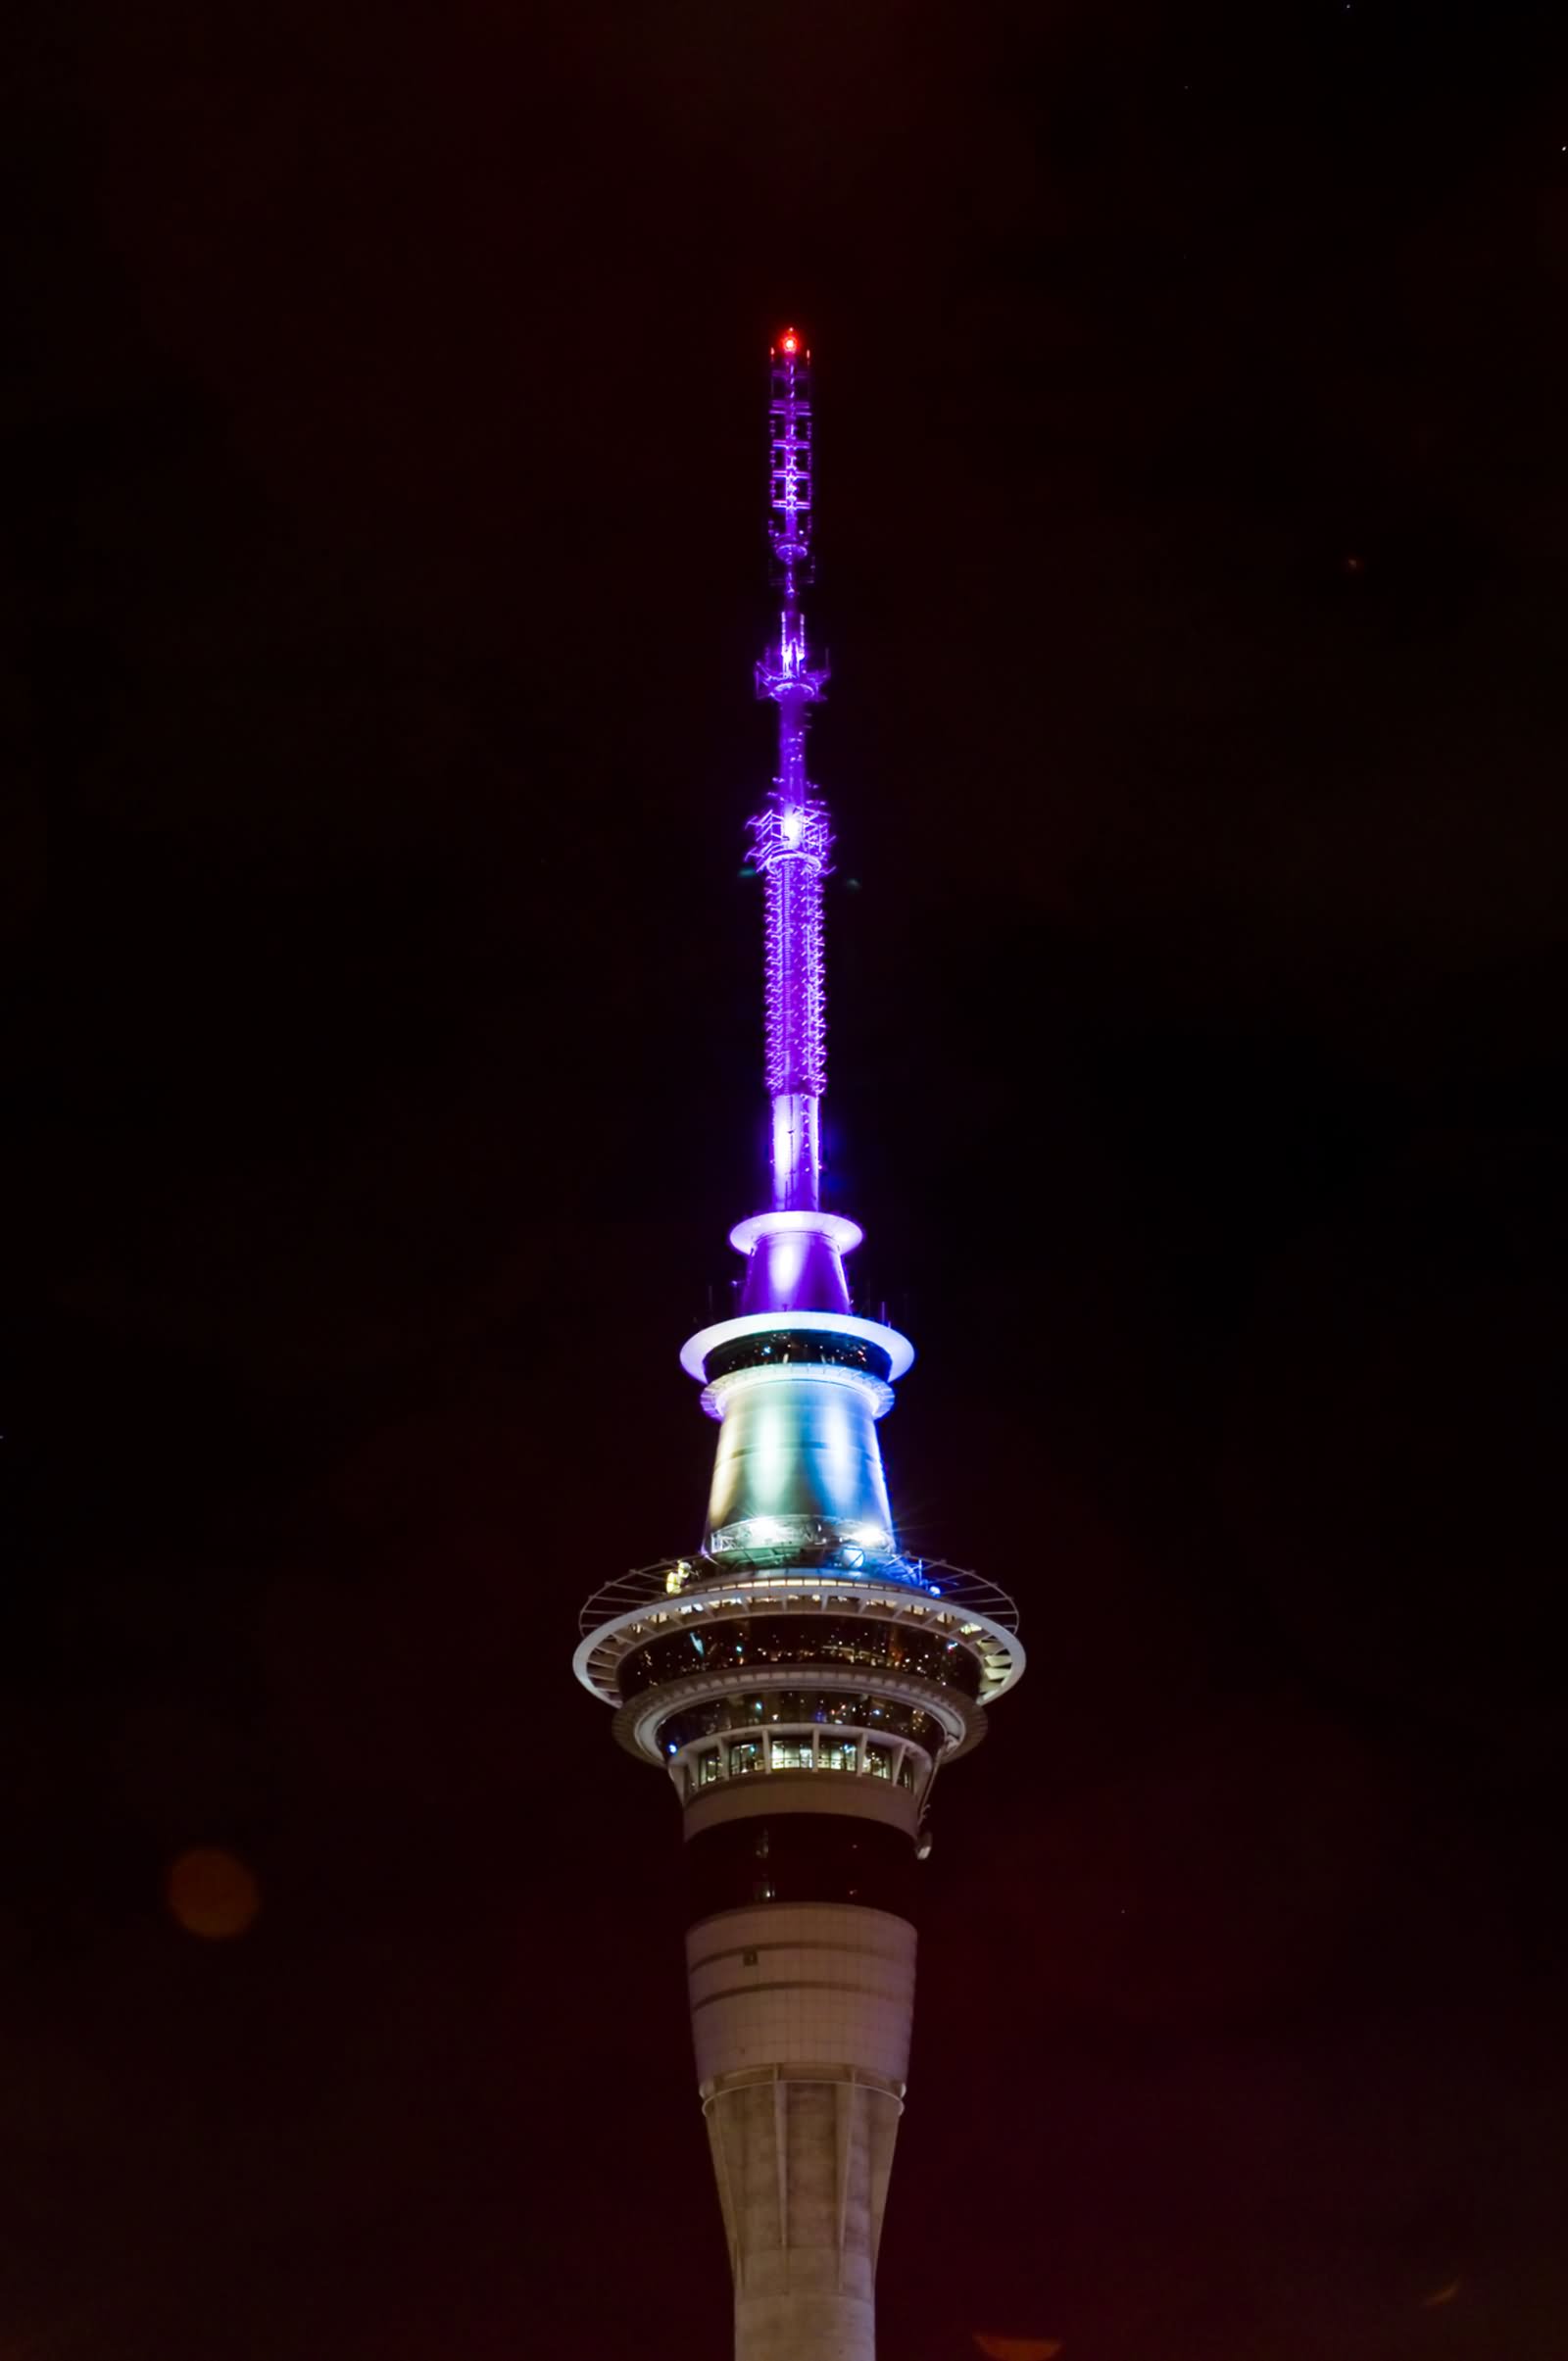 40 Most Incredible Night View Photos And Images Of The Sky Tower, Auckland